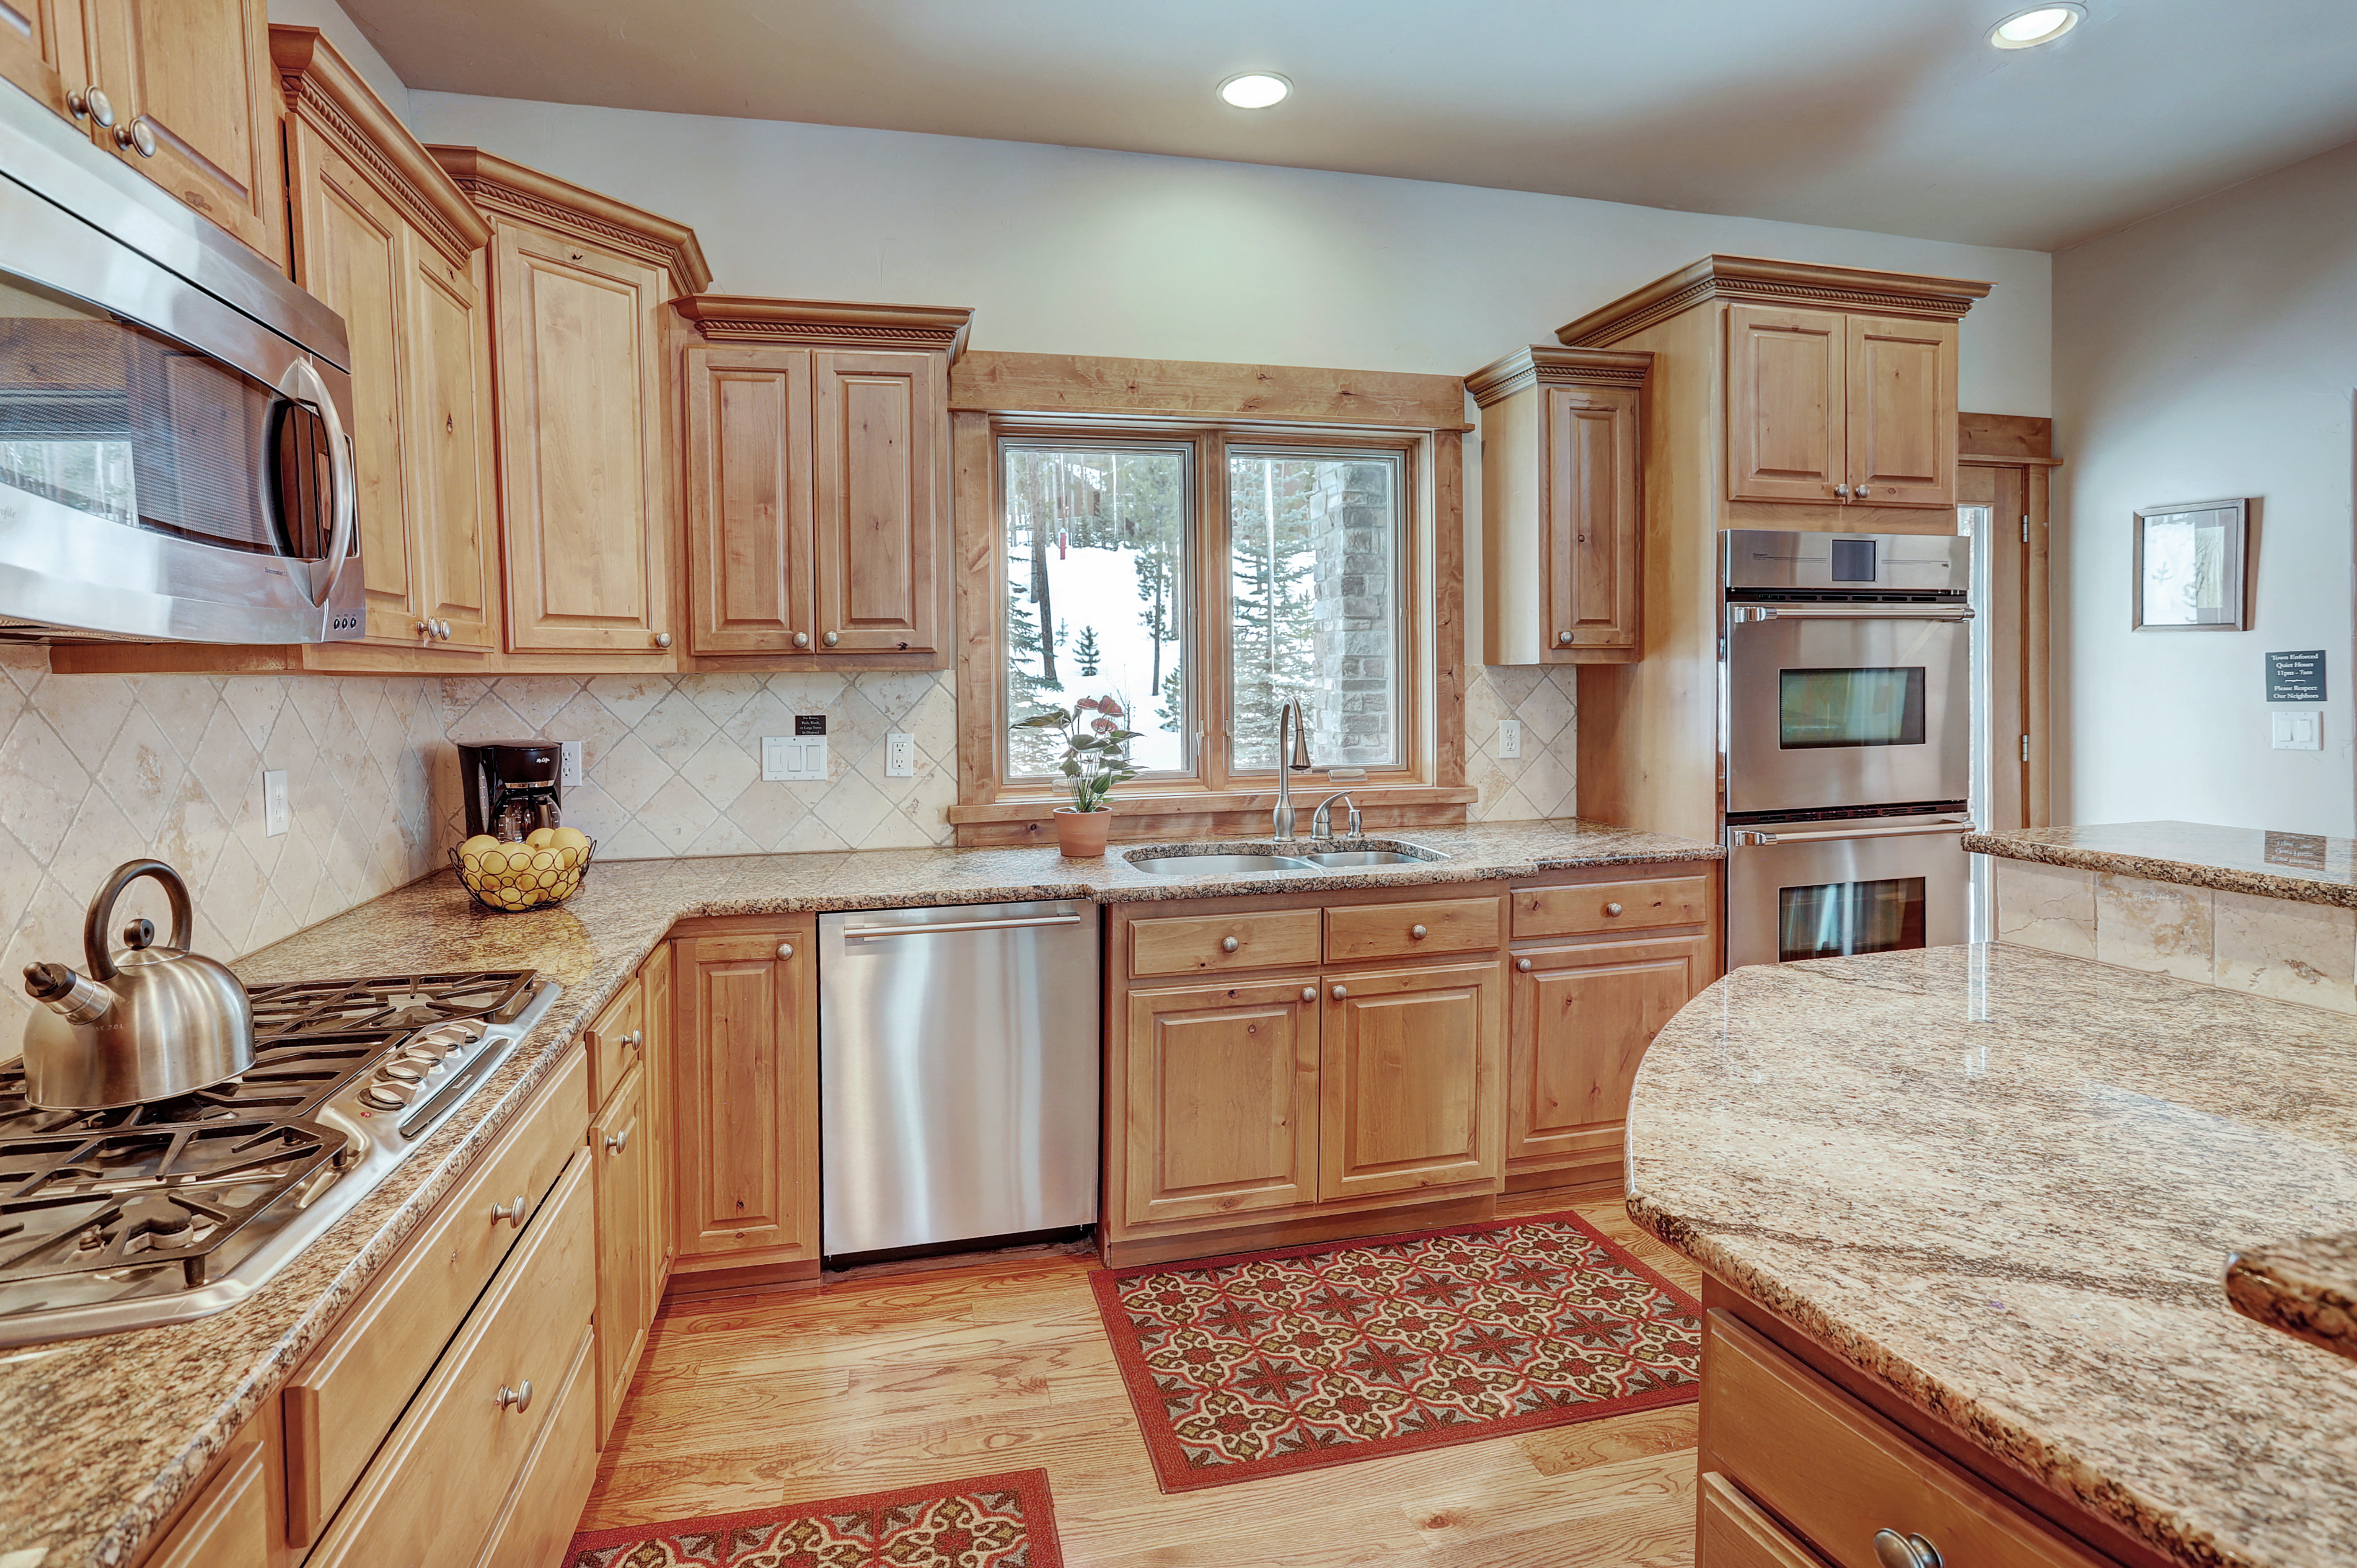 Cook a delicious meal in this great kitchen - Highlands Trail House Breckenridge Vacation Rental